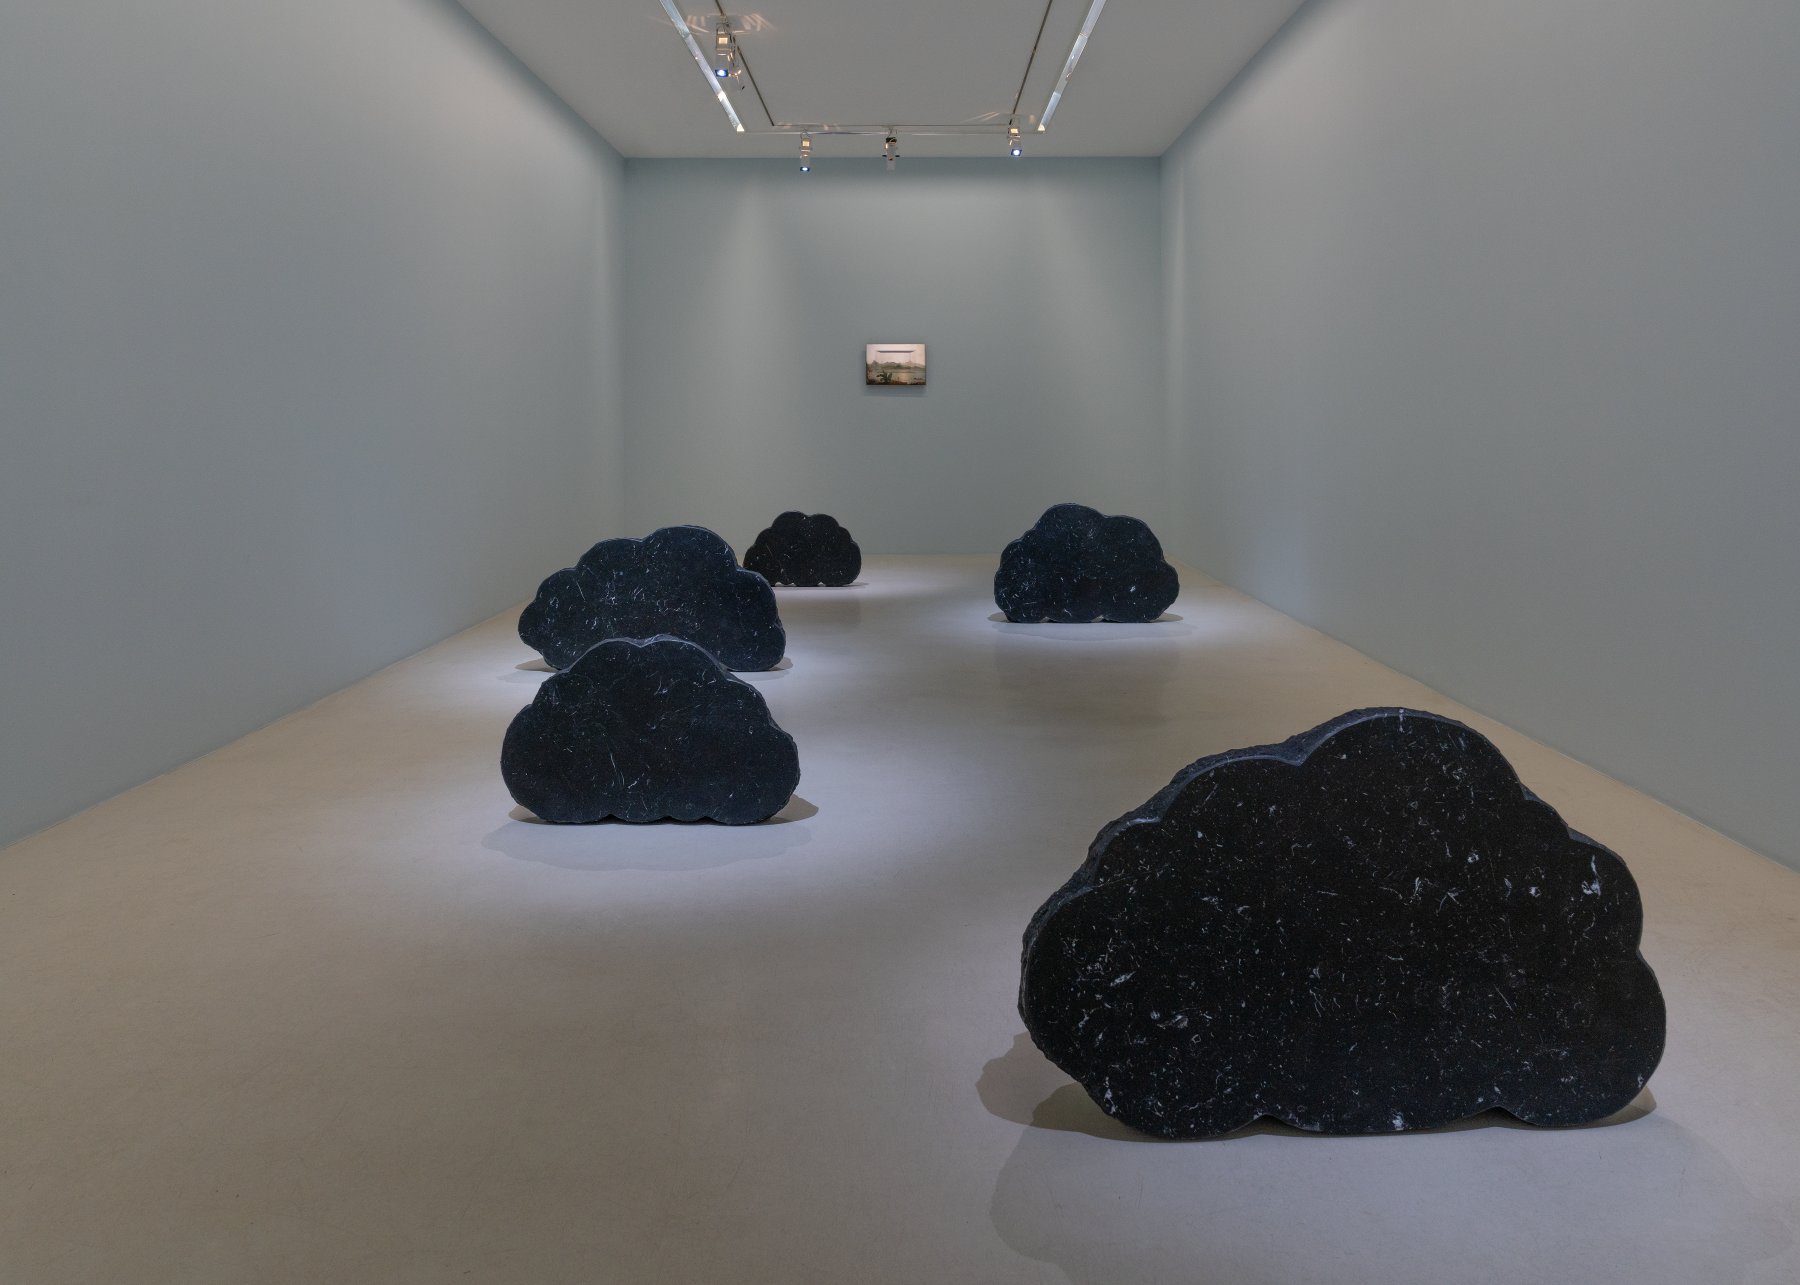 Installation image for Laurent Grasso: Orchid Island, at Perrotin